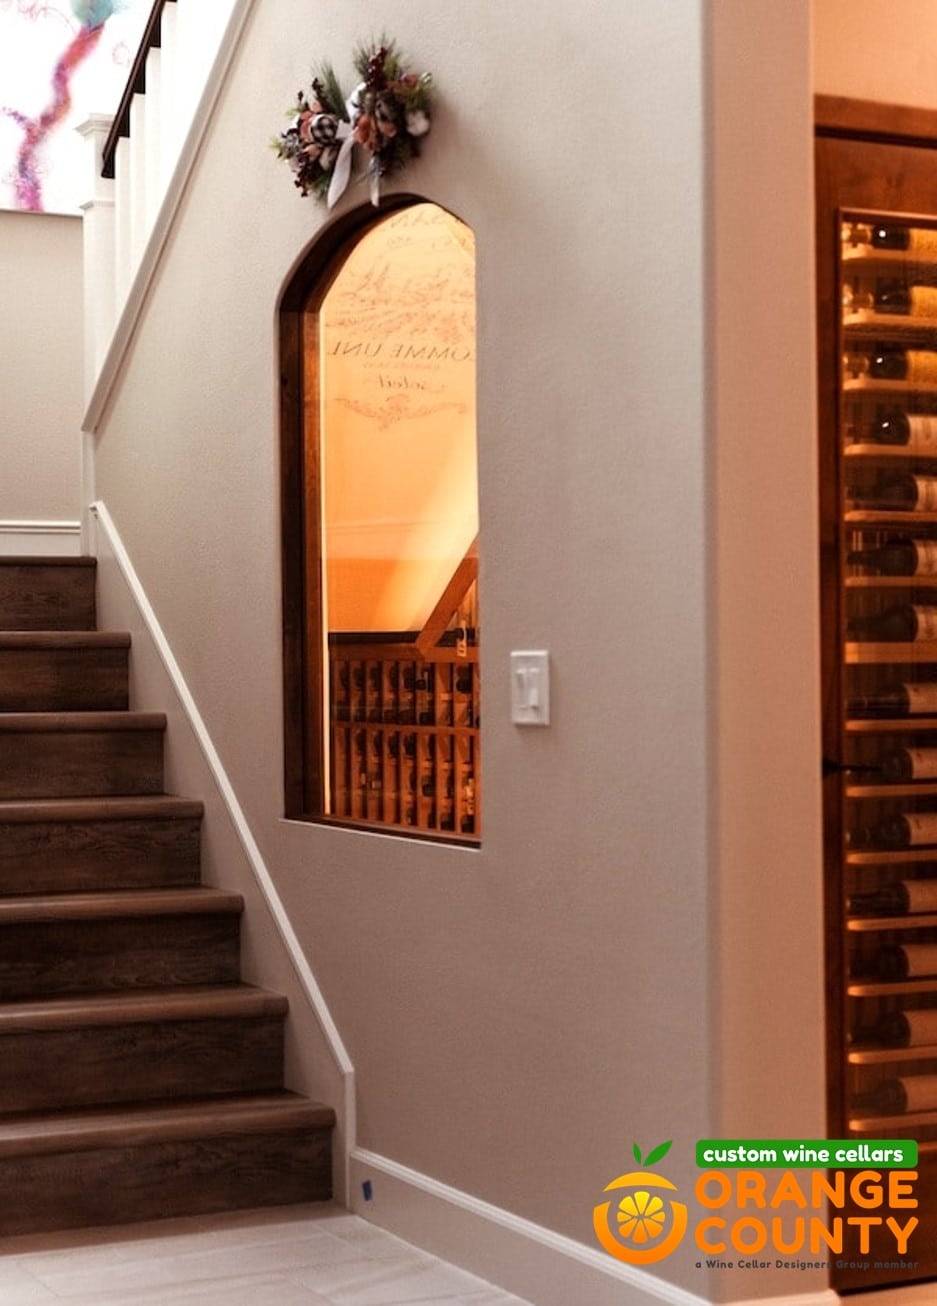 Wine Cellar Built Under the Stairs are Becoming More Popular Among Orange County Homeowners